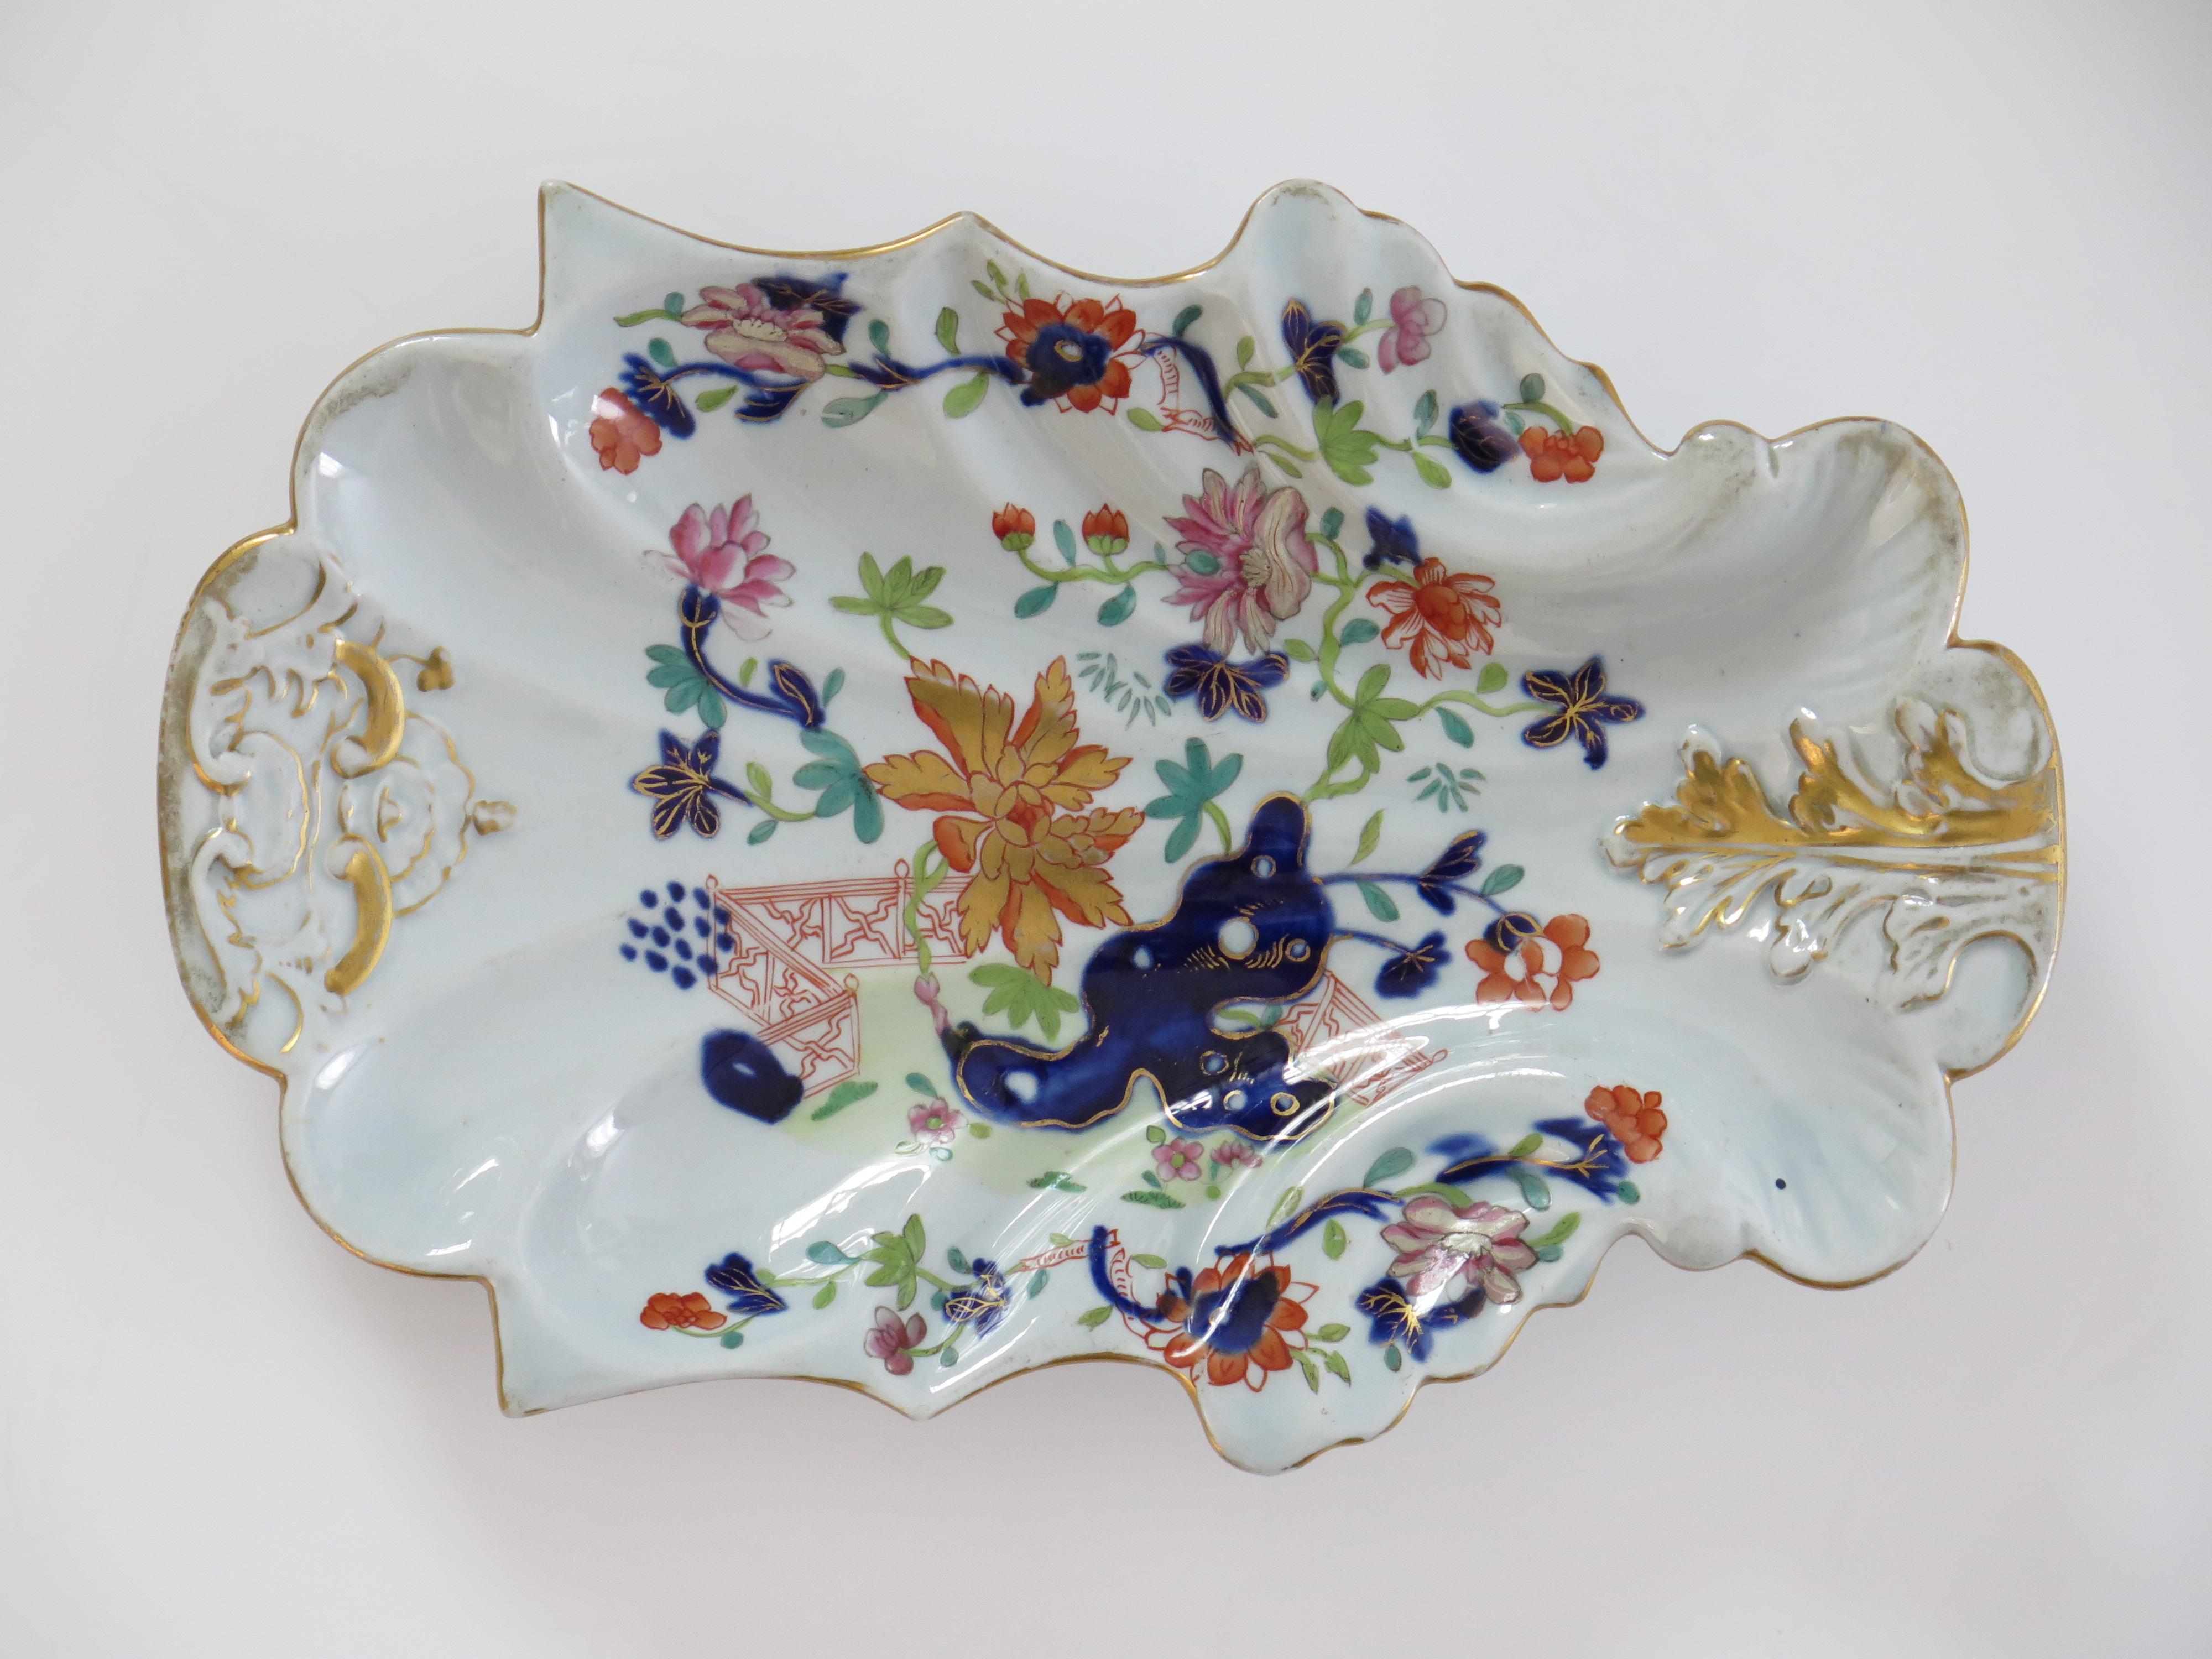 This is a very good hand painted Mason's ironstone Serving Dish or Platter  in the Fence, Rock and Tree gilded pattern, from their earliest George IIIrd period, circa 1818.

The piece is well potted with a rectangular shape with moulded sides all on